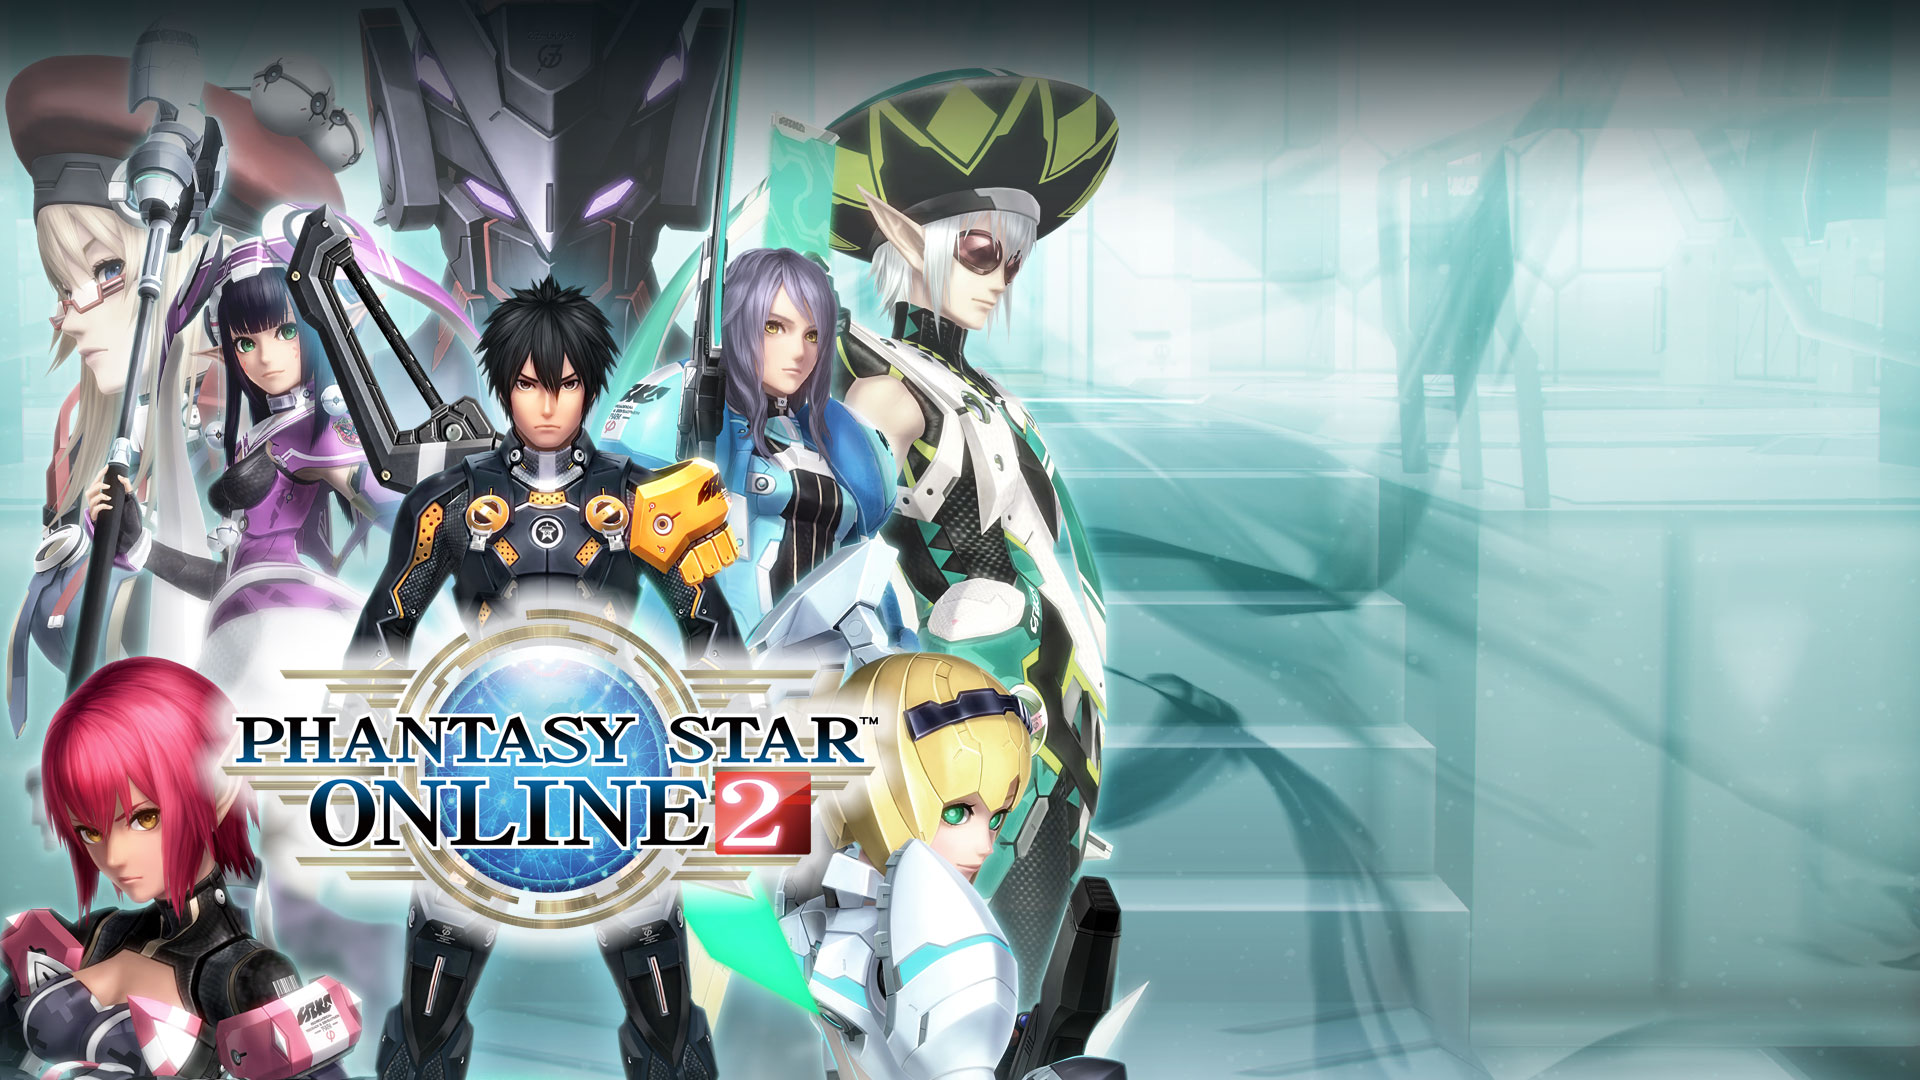 Phantasy Star Online 2, a collage of characters from the game.